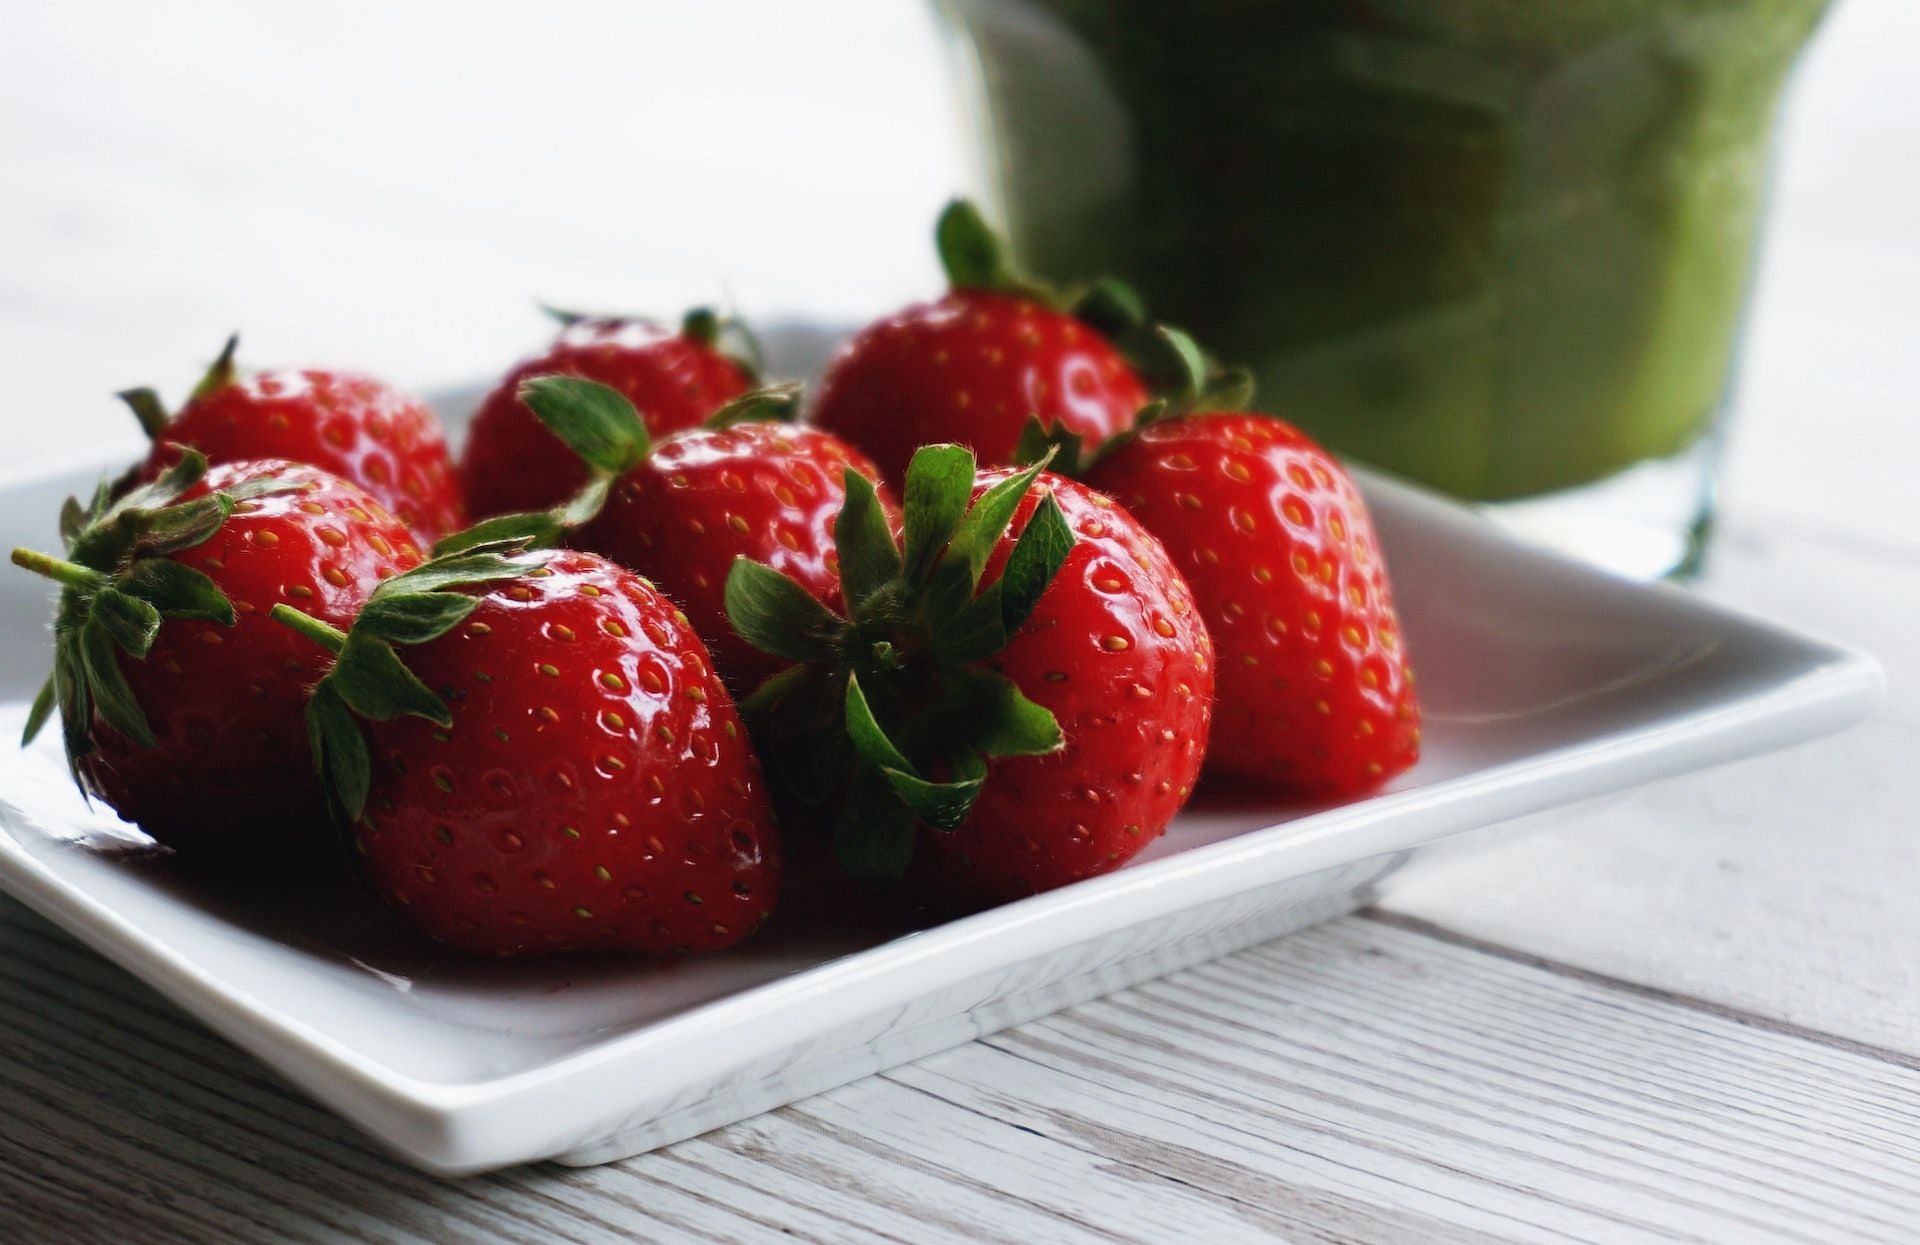 Strawberries can help you lose weight. (Photo via Pexels/Suzy Hazelwood)